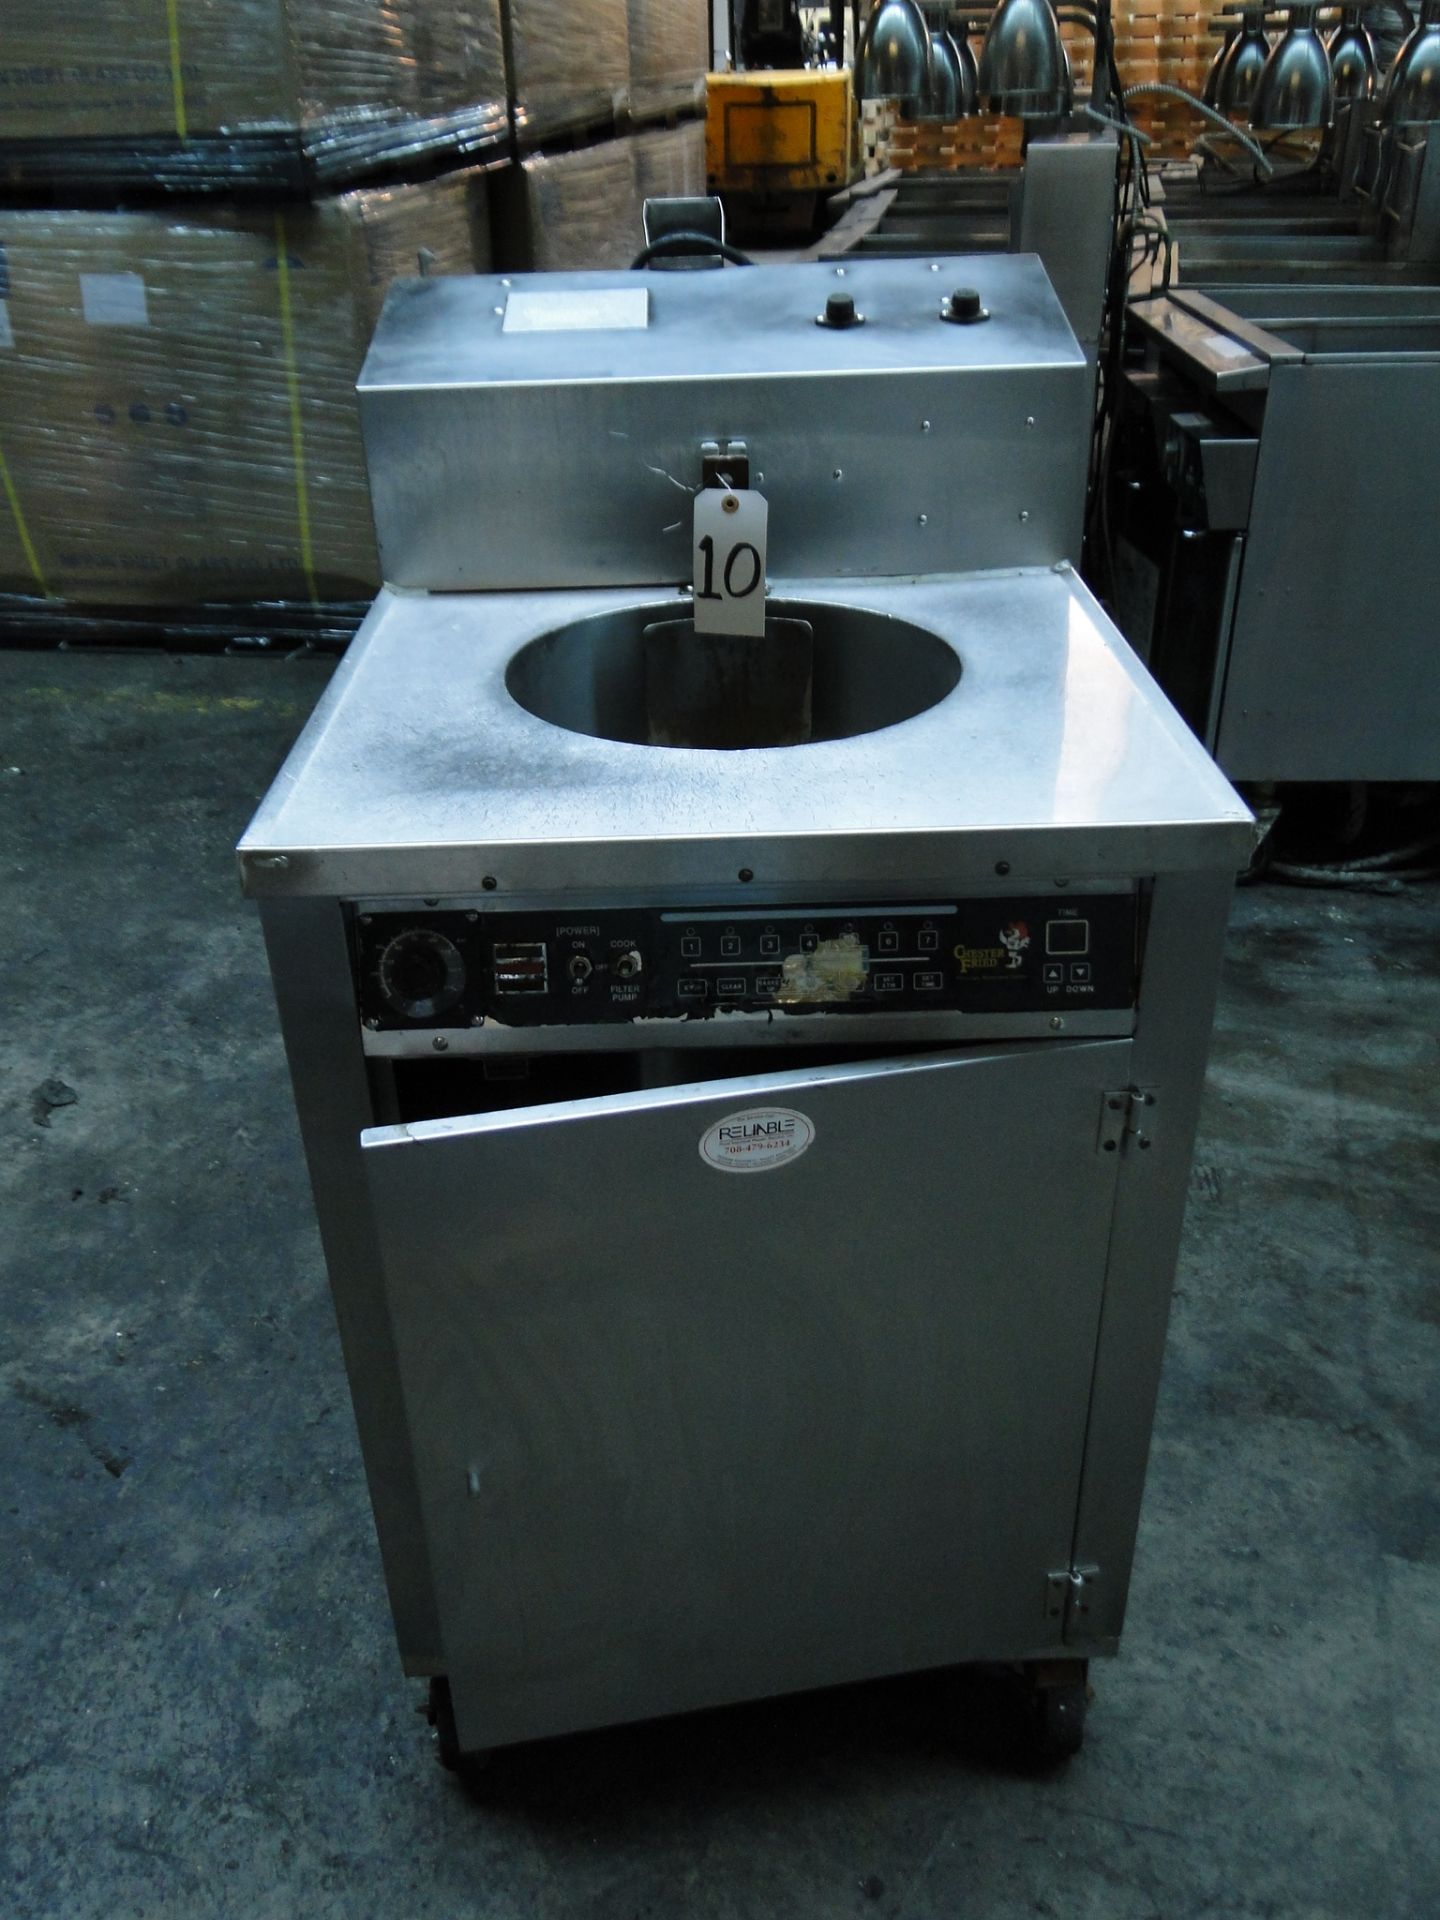 Giles "Chester Fried" Gas Fired Deep Fryer with Auto Lift, Model CF4006, S/N: A410109108, Equipped - Image 4 of 7